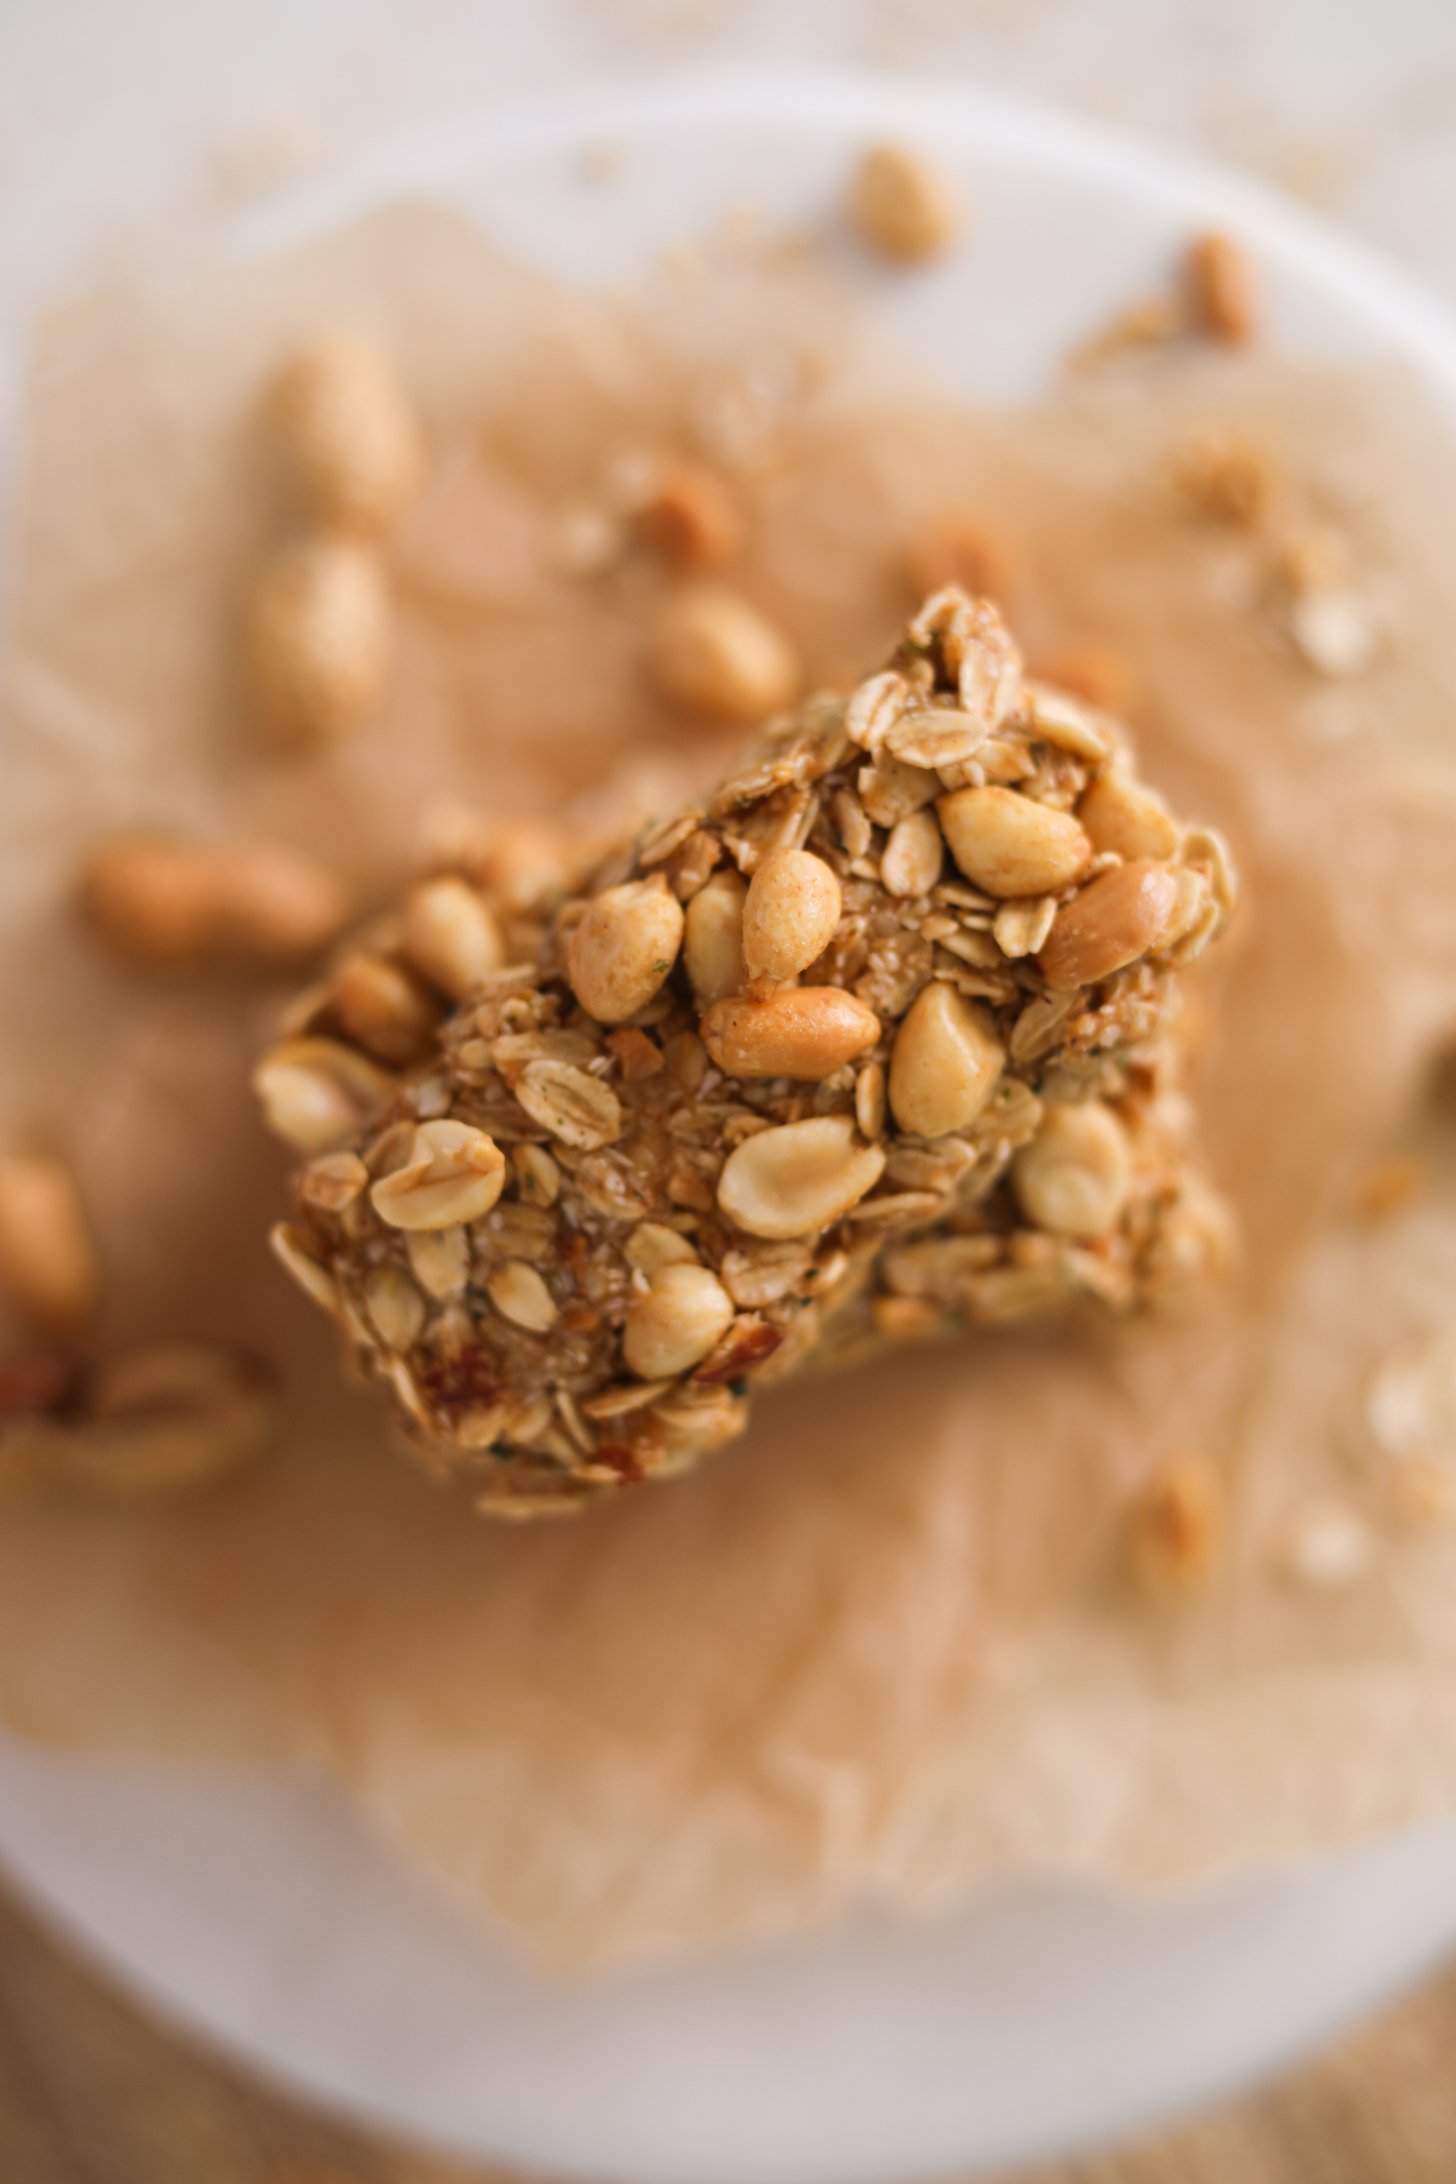 Top view of an oat bar topped with peanuts on a stack of bars surrounded by peanuts.